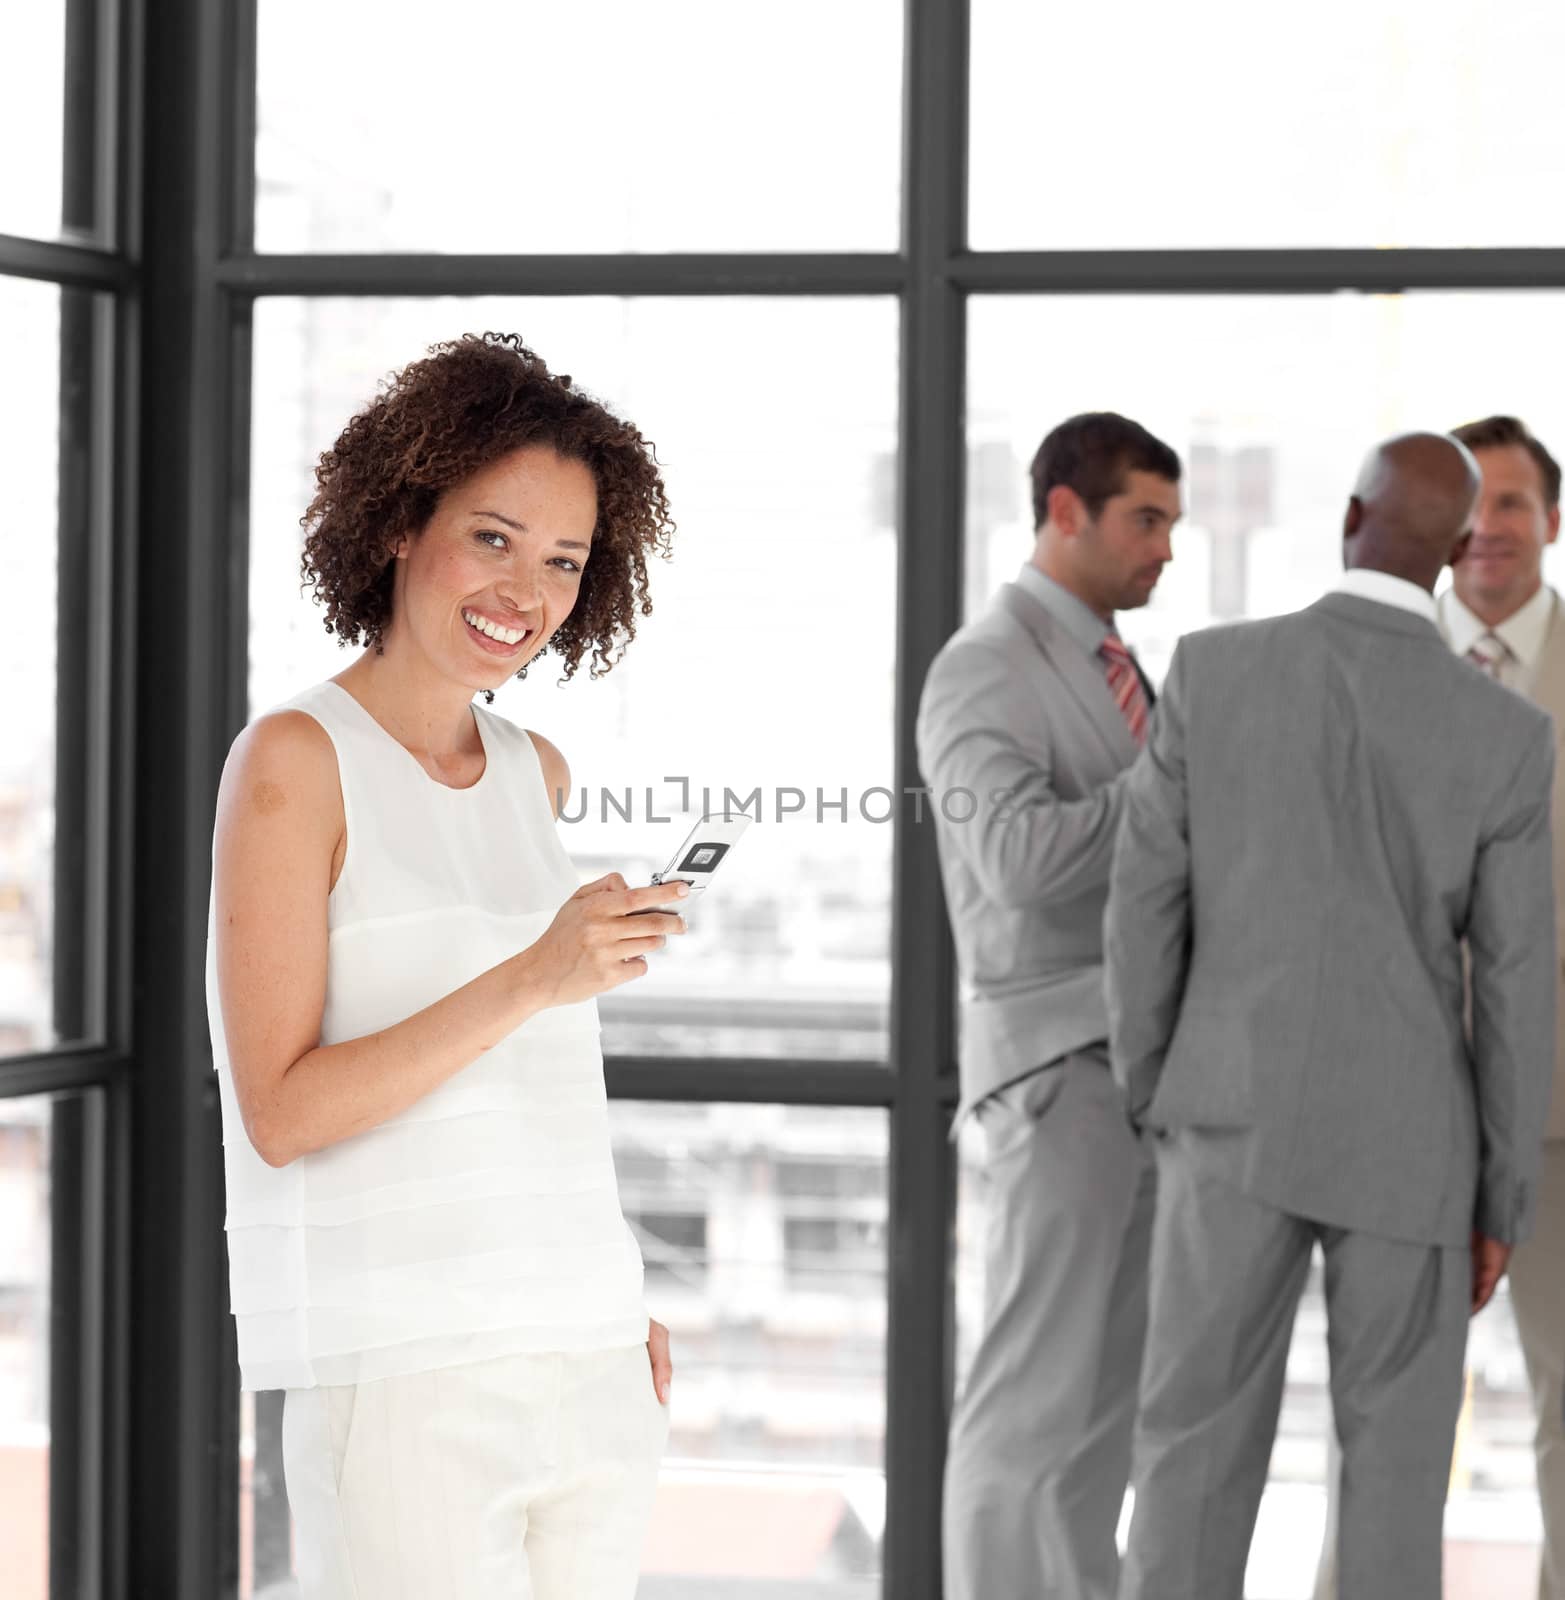 Cute businesswoman on phone in office with her team in the background